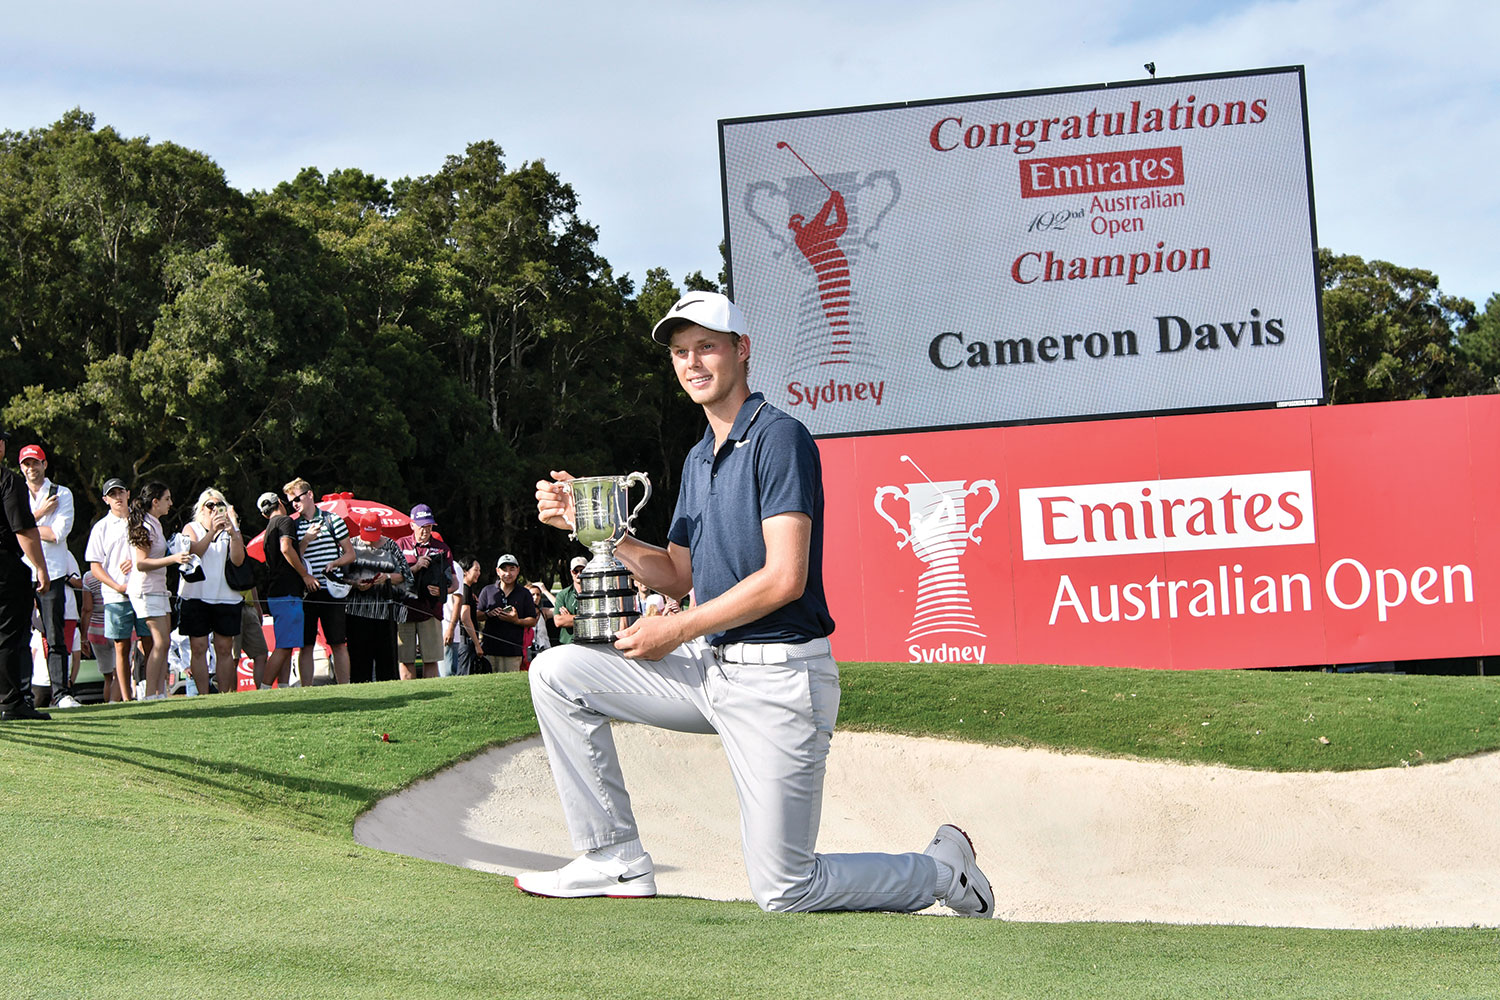 This year’s Australian Open winner will pose in front of different signage.